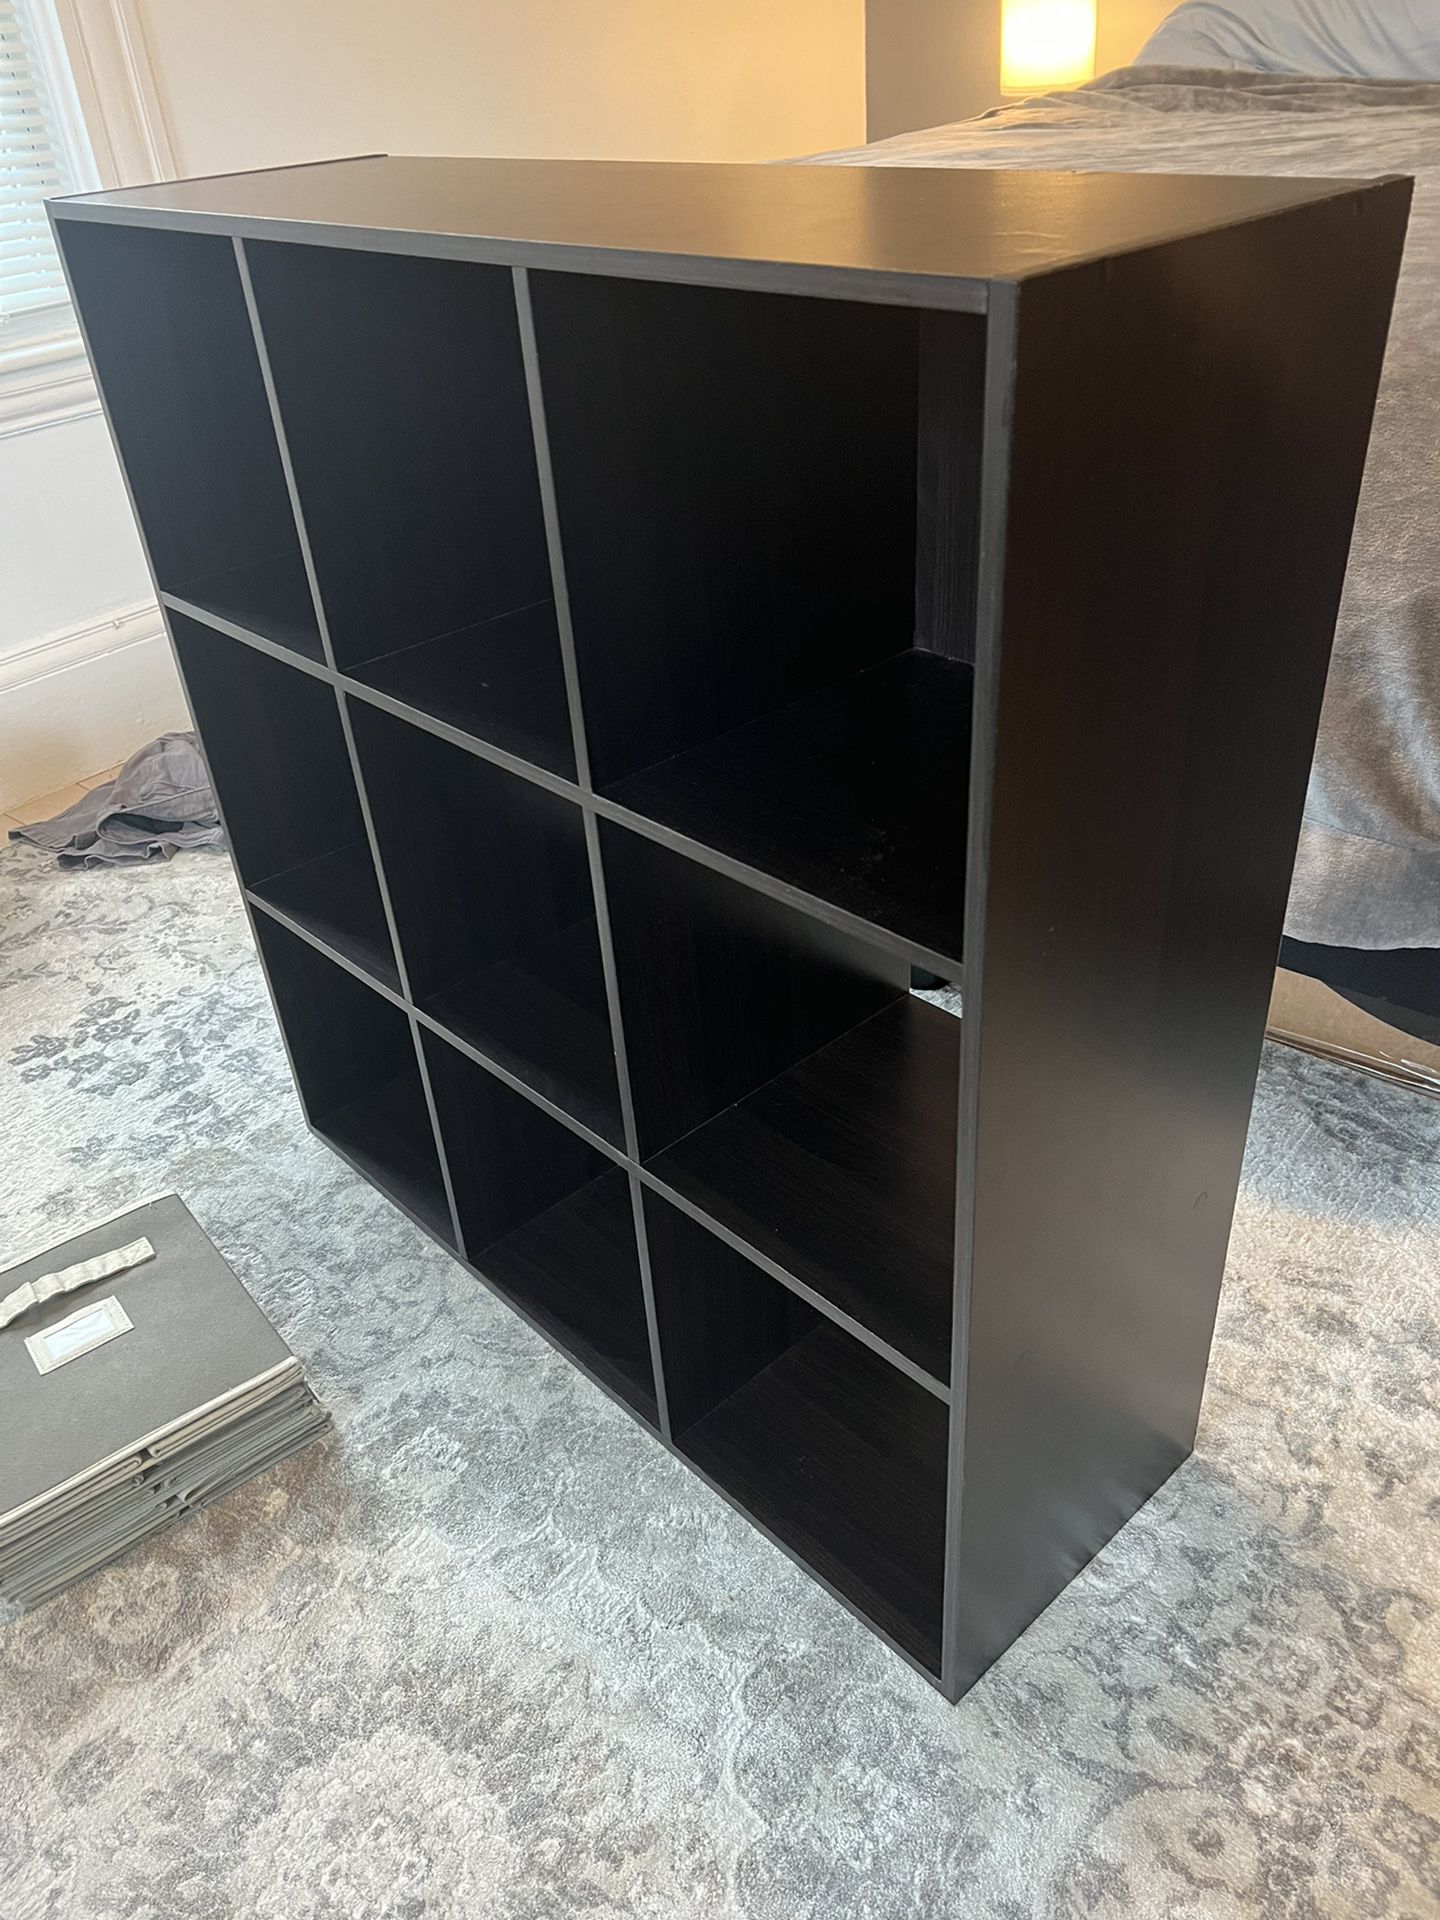 9 Cube Organizer Shelf With Fabric Drawers (never used) - $140 or best offer - 35.5" X 35.5" X 11.75"